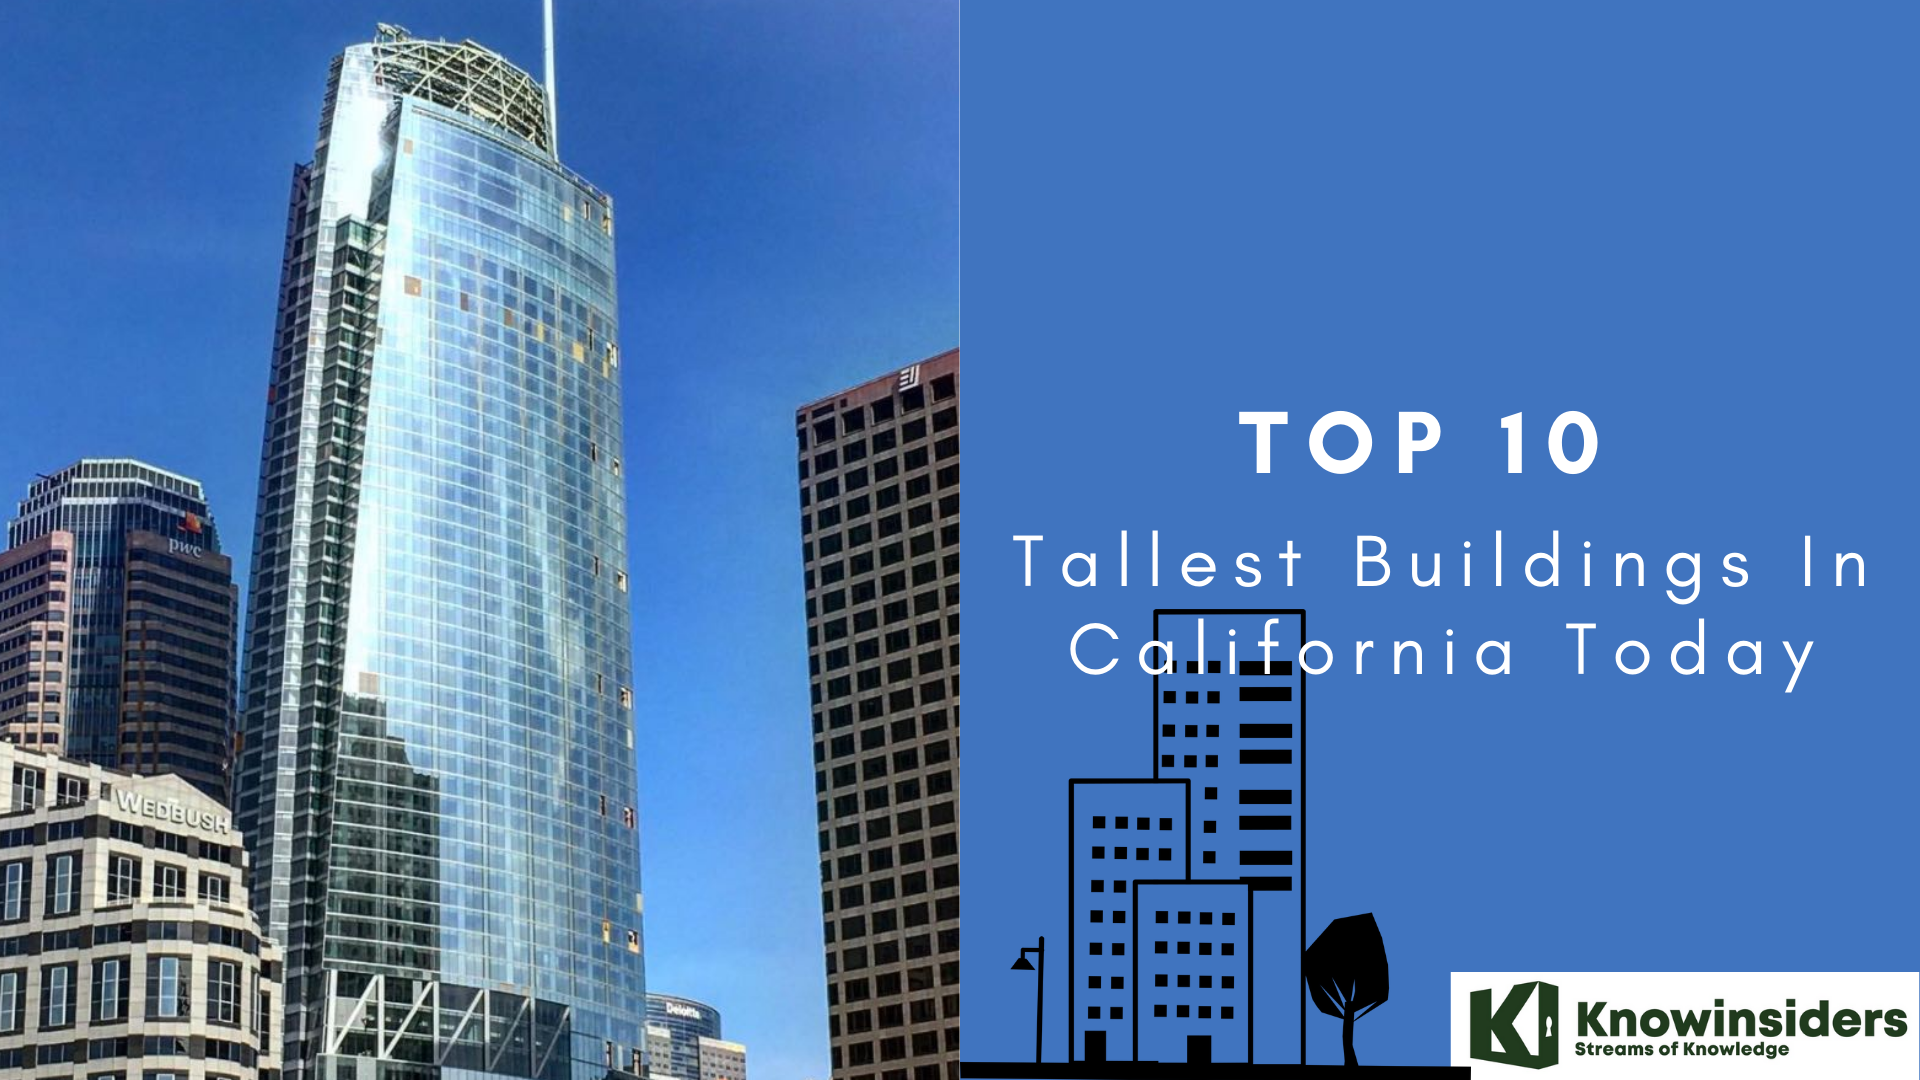 Top 10 Tallest Buildings In California Today